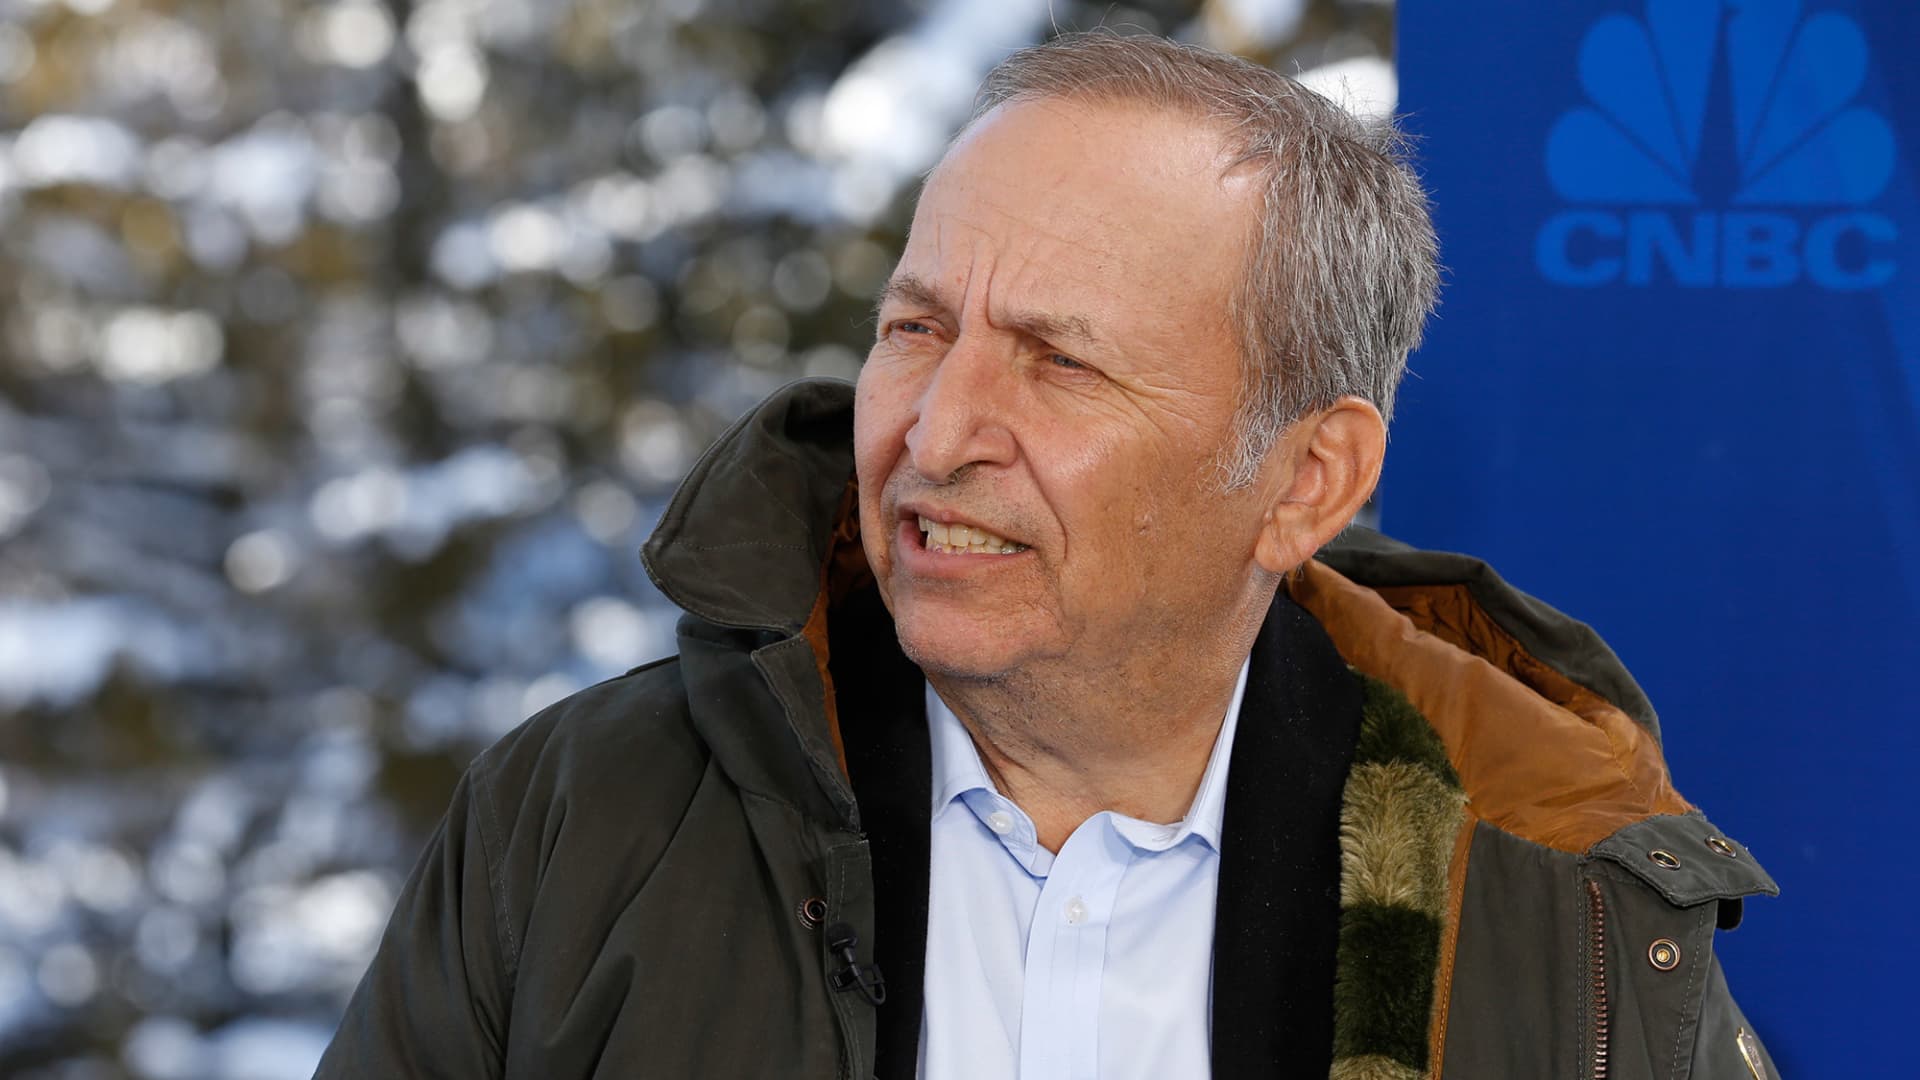 Larry Summers at the World Economic Forum in Davos, Switzerland.